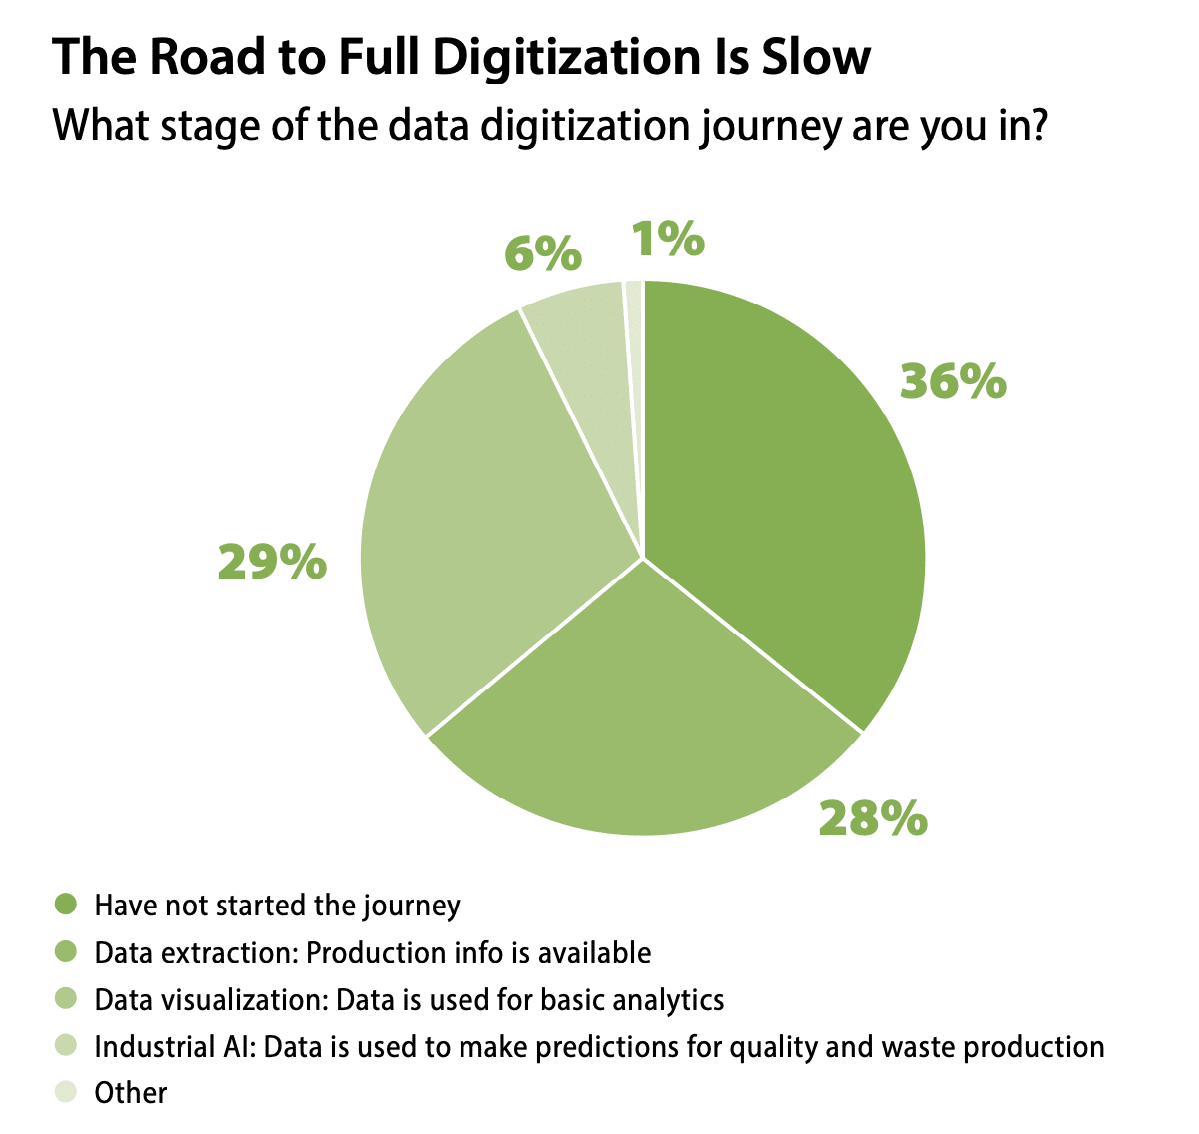 The road to full digitization in the food processing industry is slow.